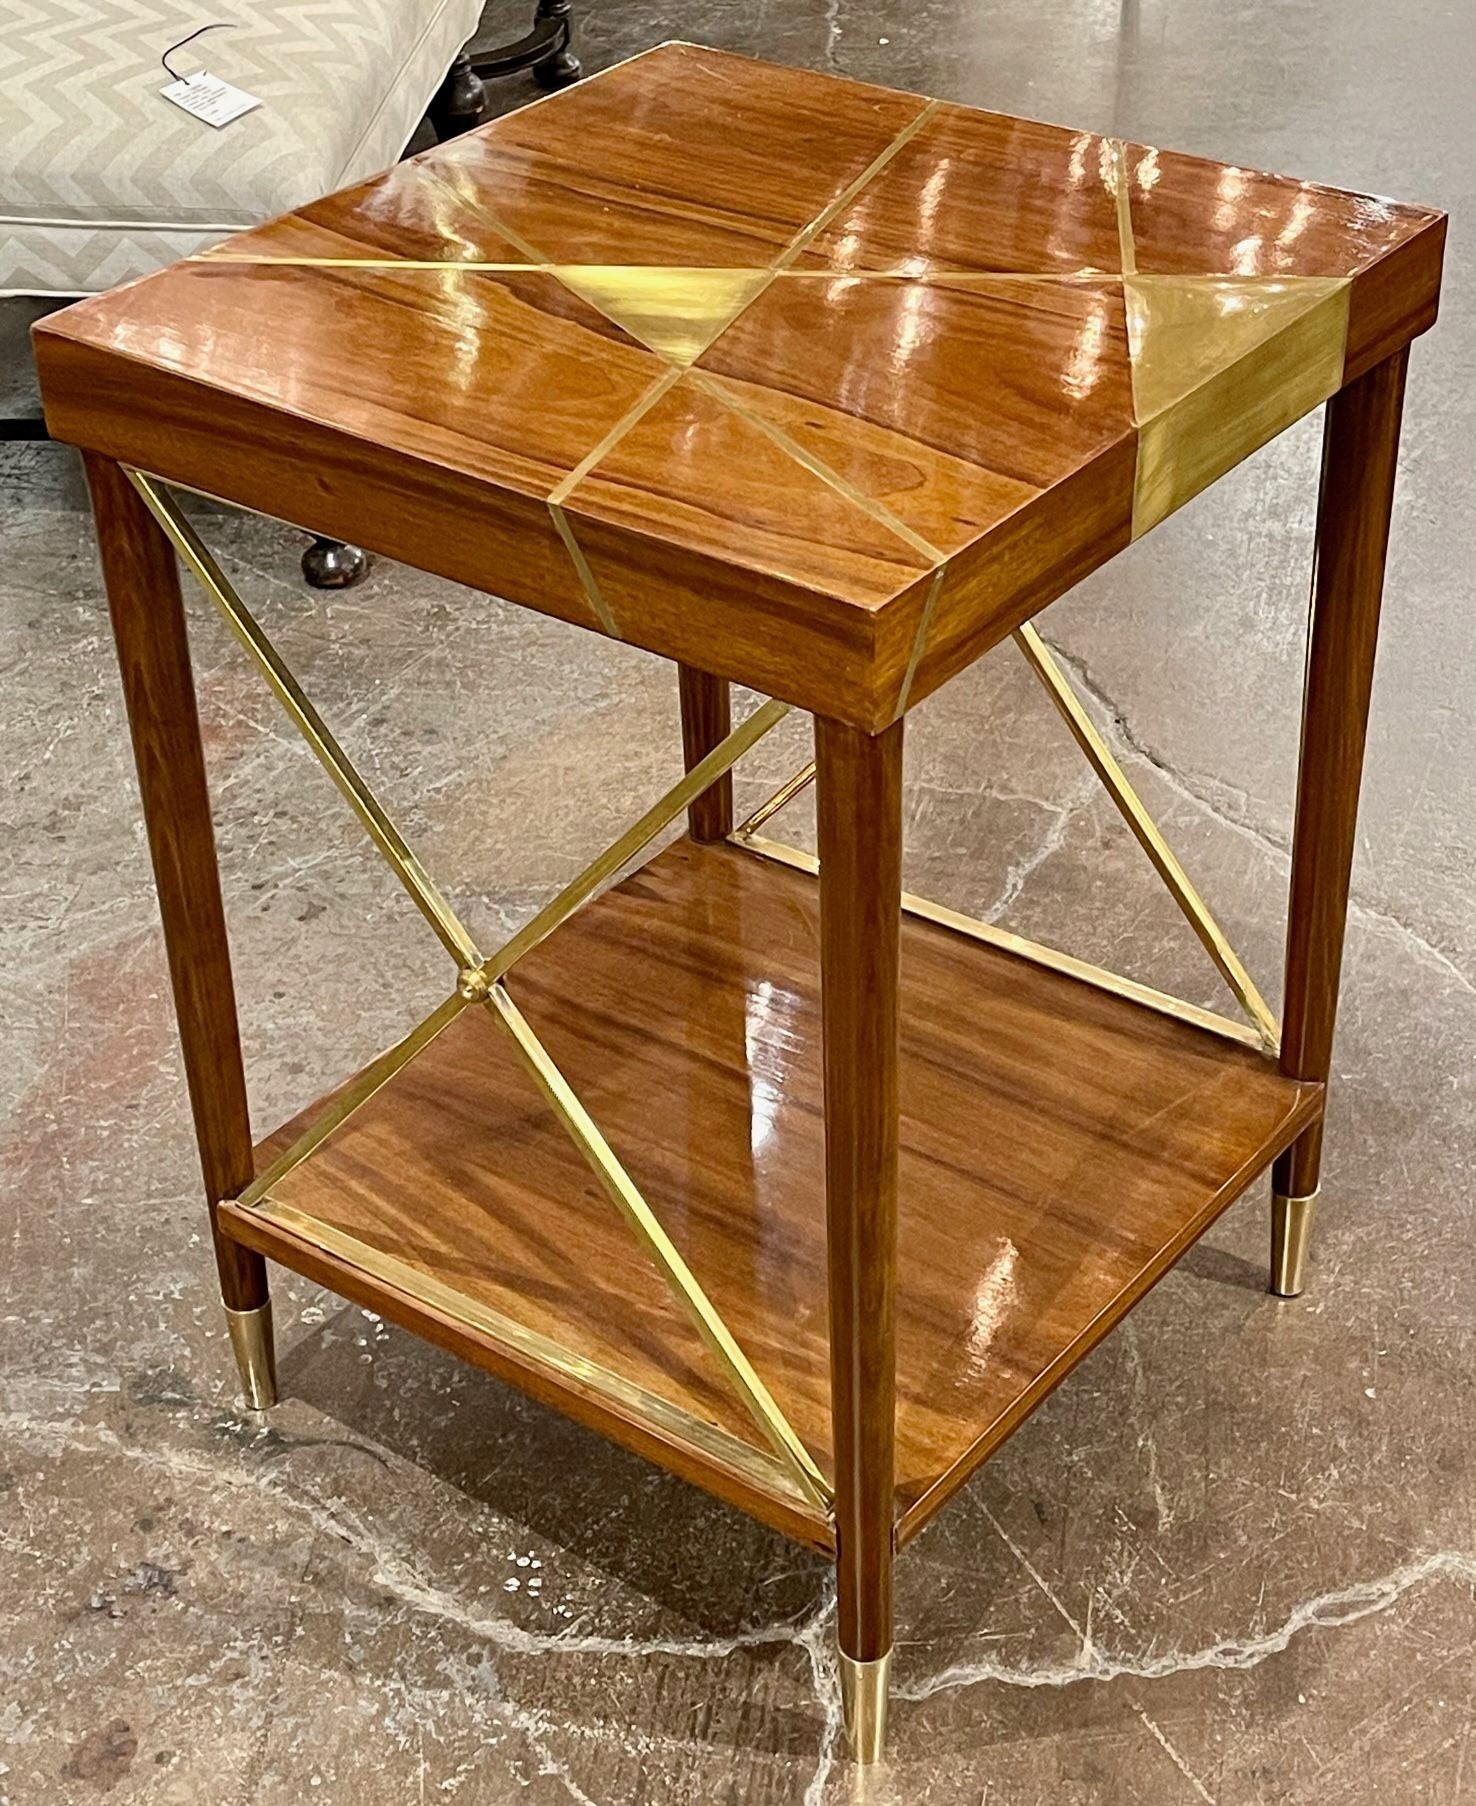 Vintage Italian mid-century modern walnut and brass inlaid side table. Circa 1960.  Perfect for today's transitional designs!